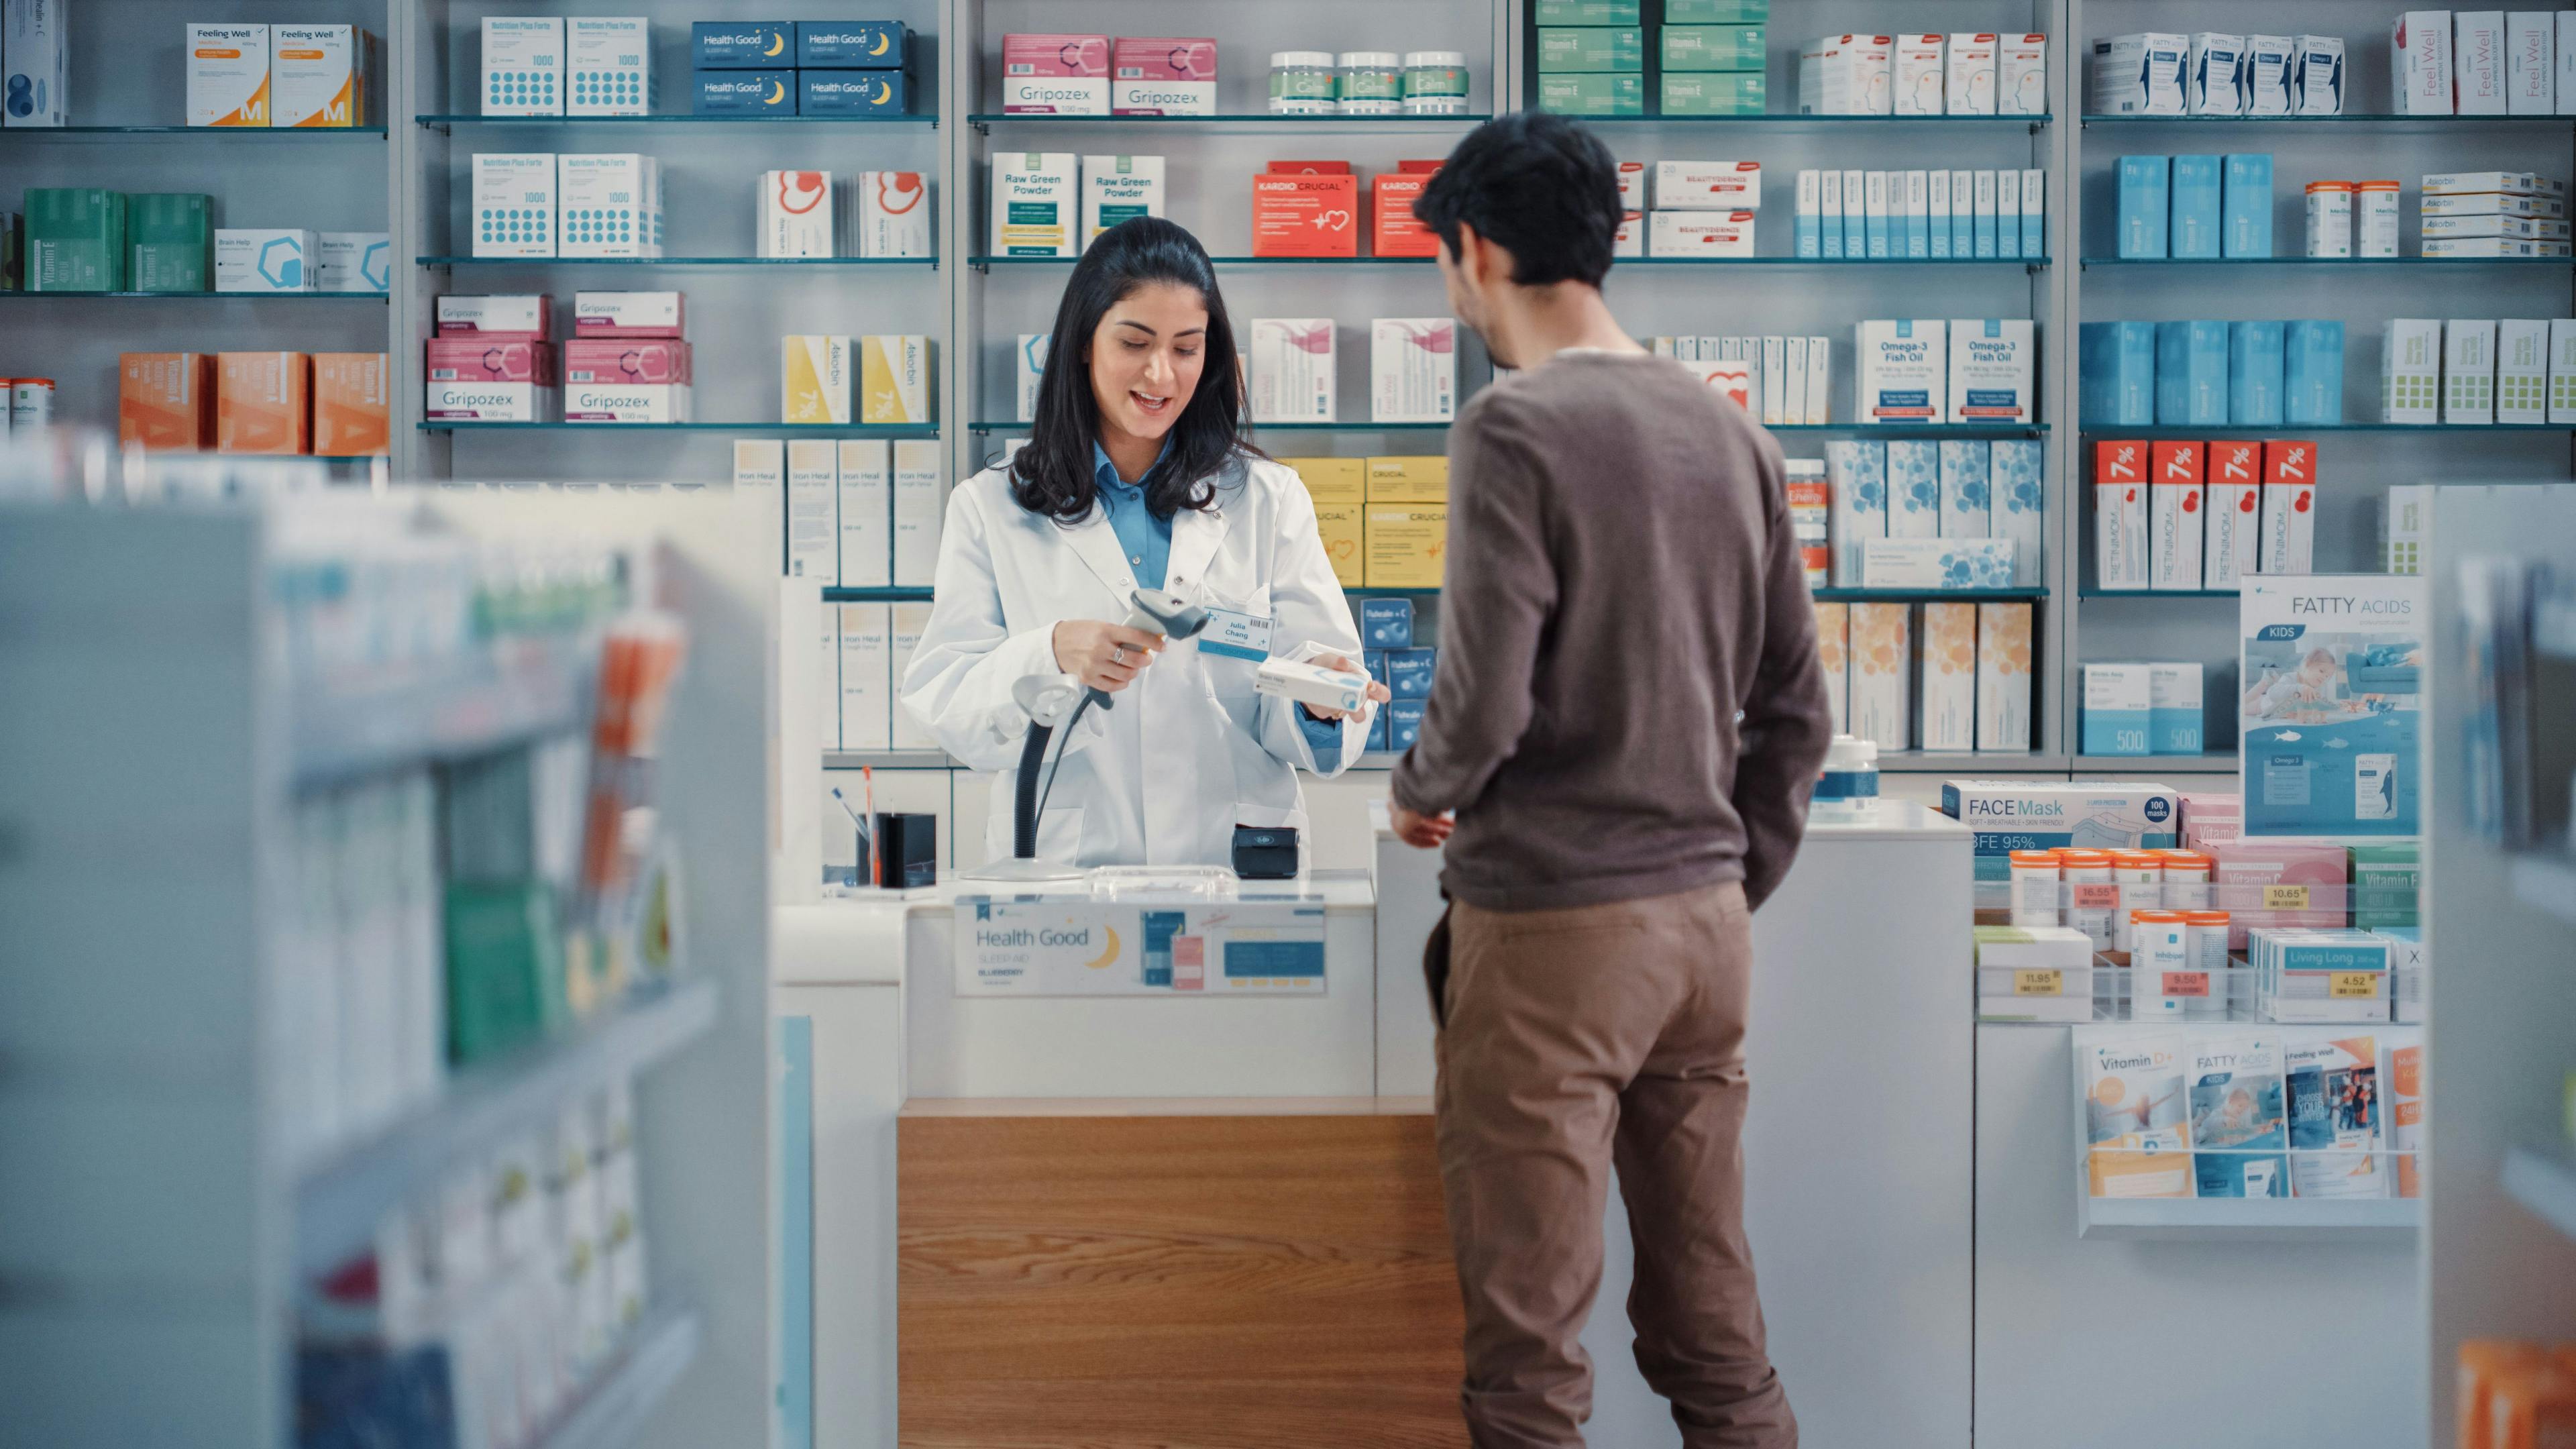 Pharmacy Drugstore Checkout Cashier Counter: Beautiful Female Pharmacist Scans Barcode and Handsome Young Man Talks to a Cashier and Pays for the Health Care Products at the Checkout Counter. | Image Credit: Gorodenkoff - stock.adobe.com